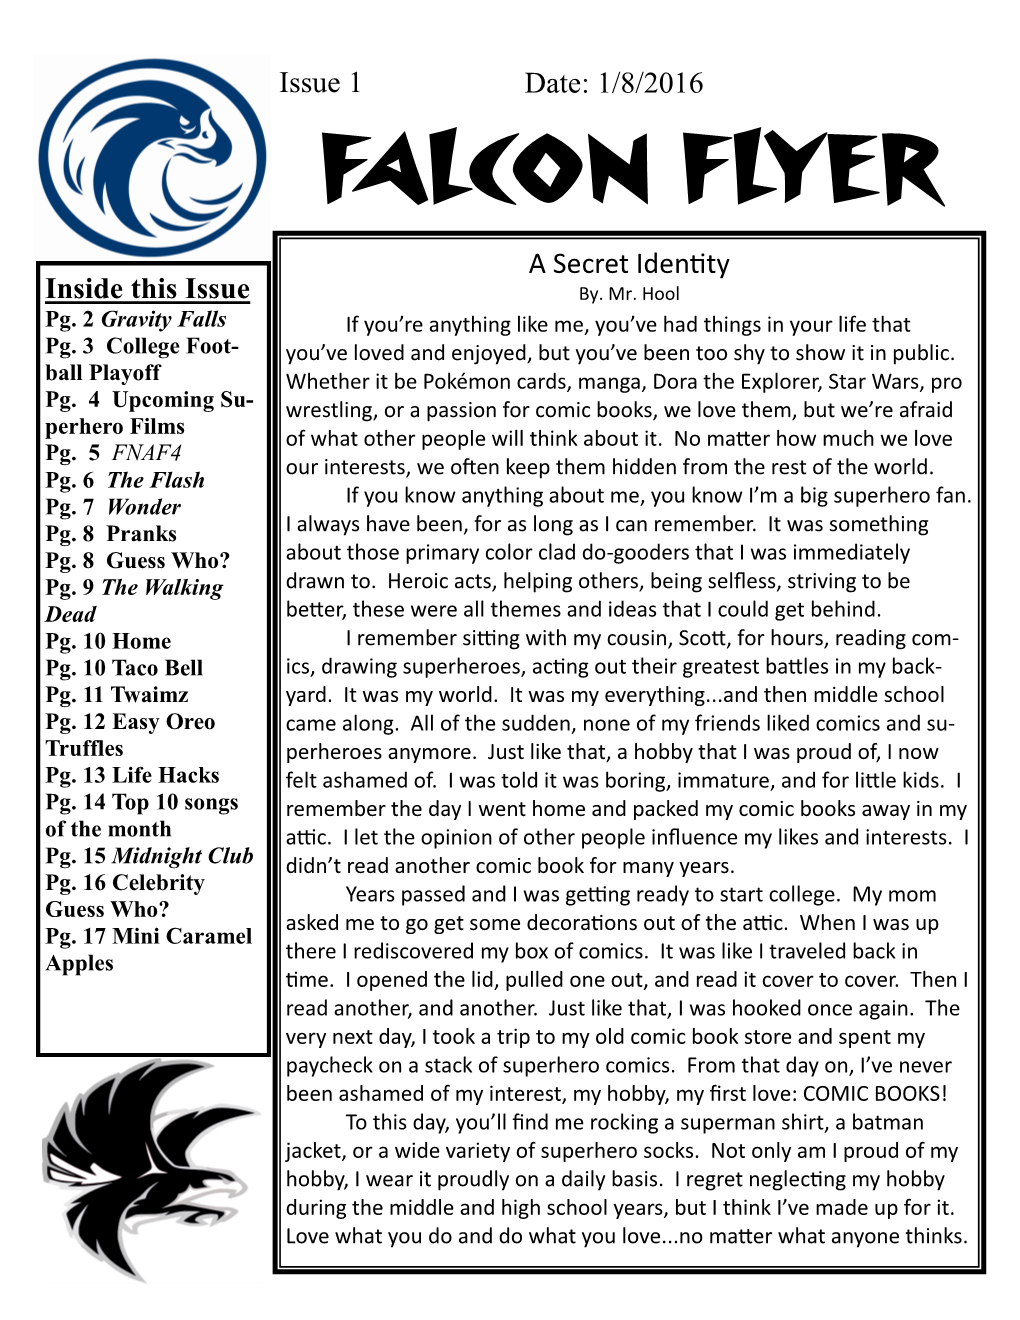 FALCON FLYER a Secret Identity Inside This Issue By